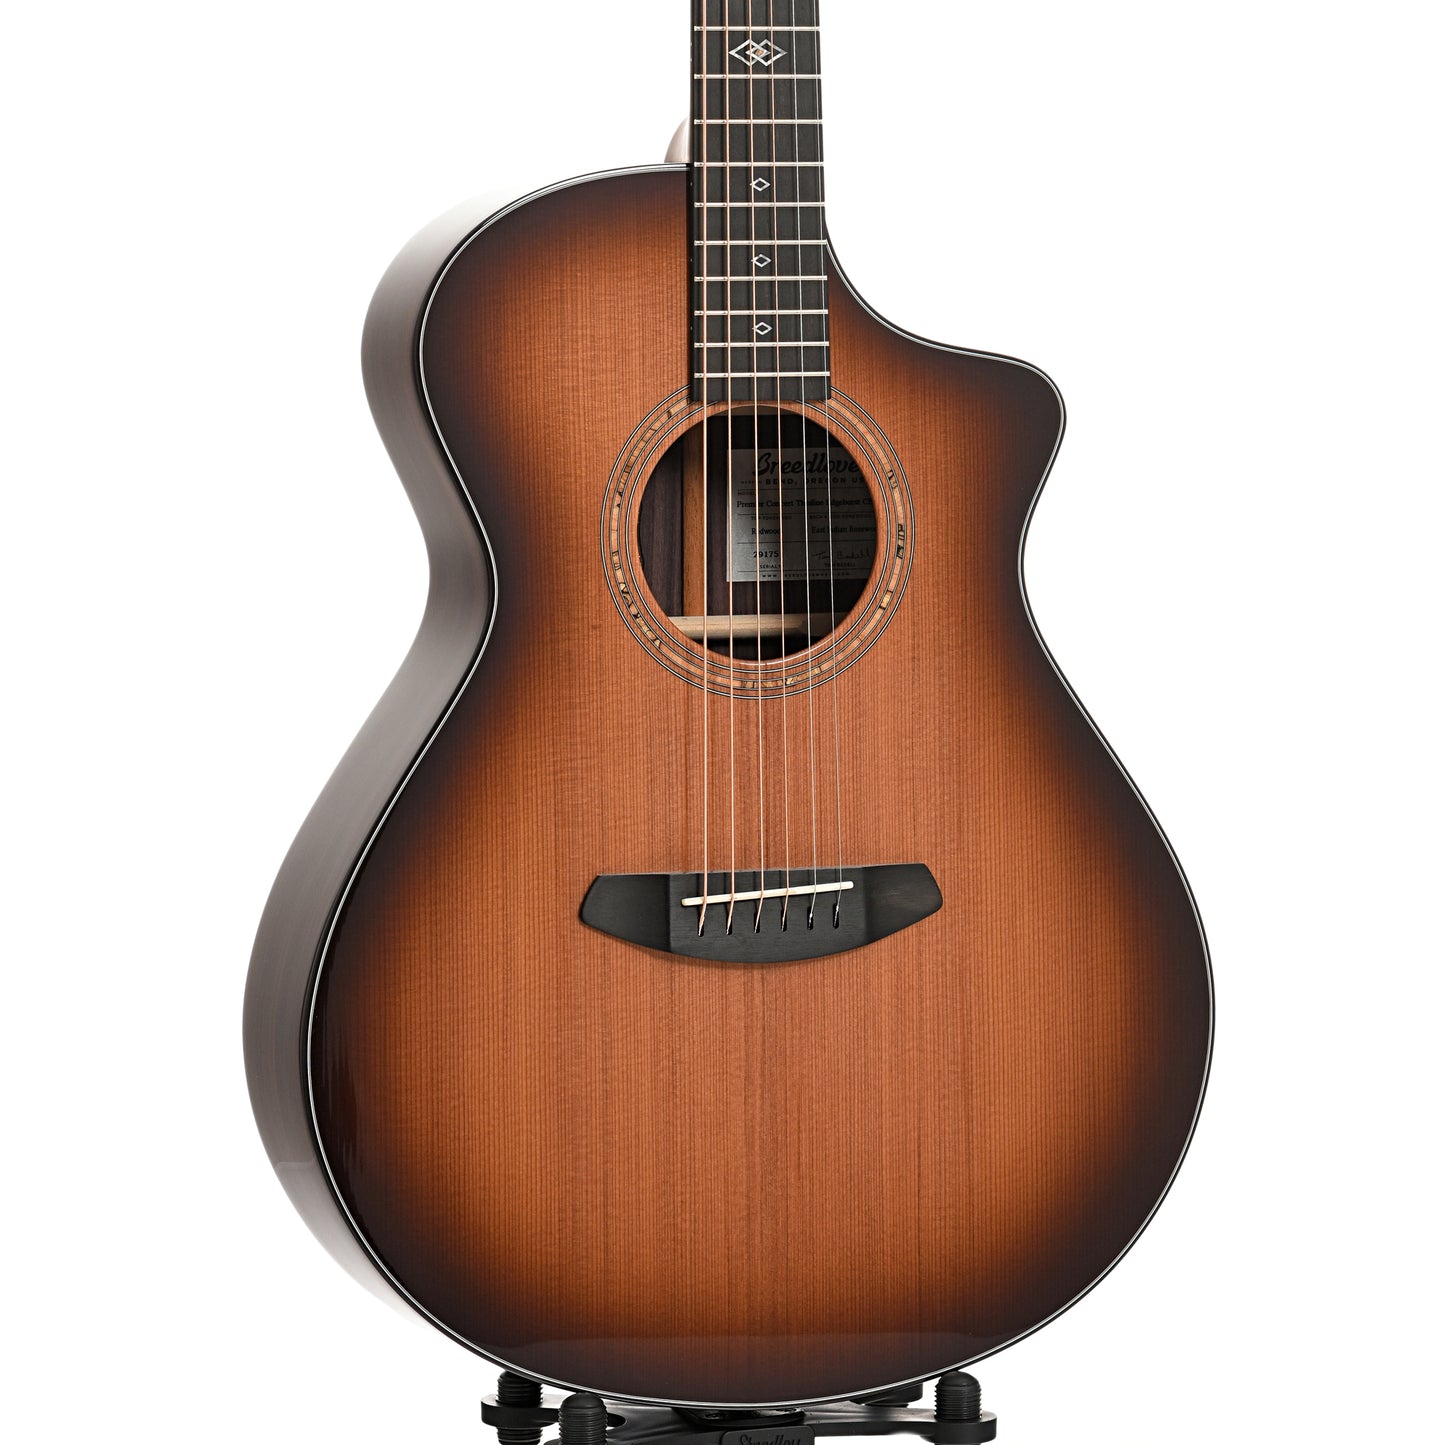 Front and side of Breedlove Premier Concert Thinline Edgeburst CE Acoustic-Electric Guitar